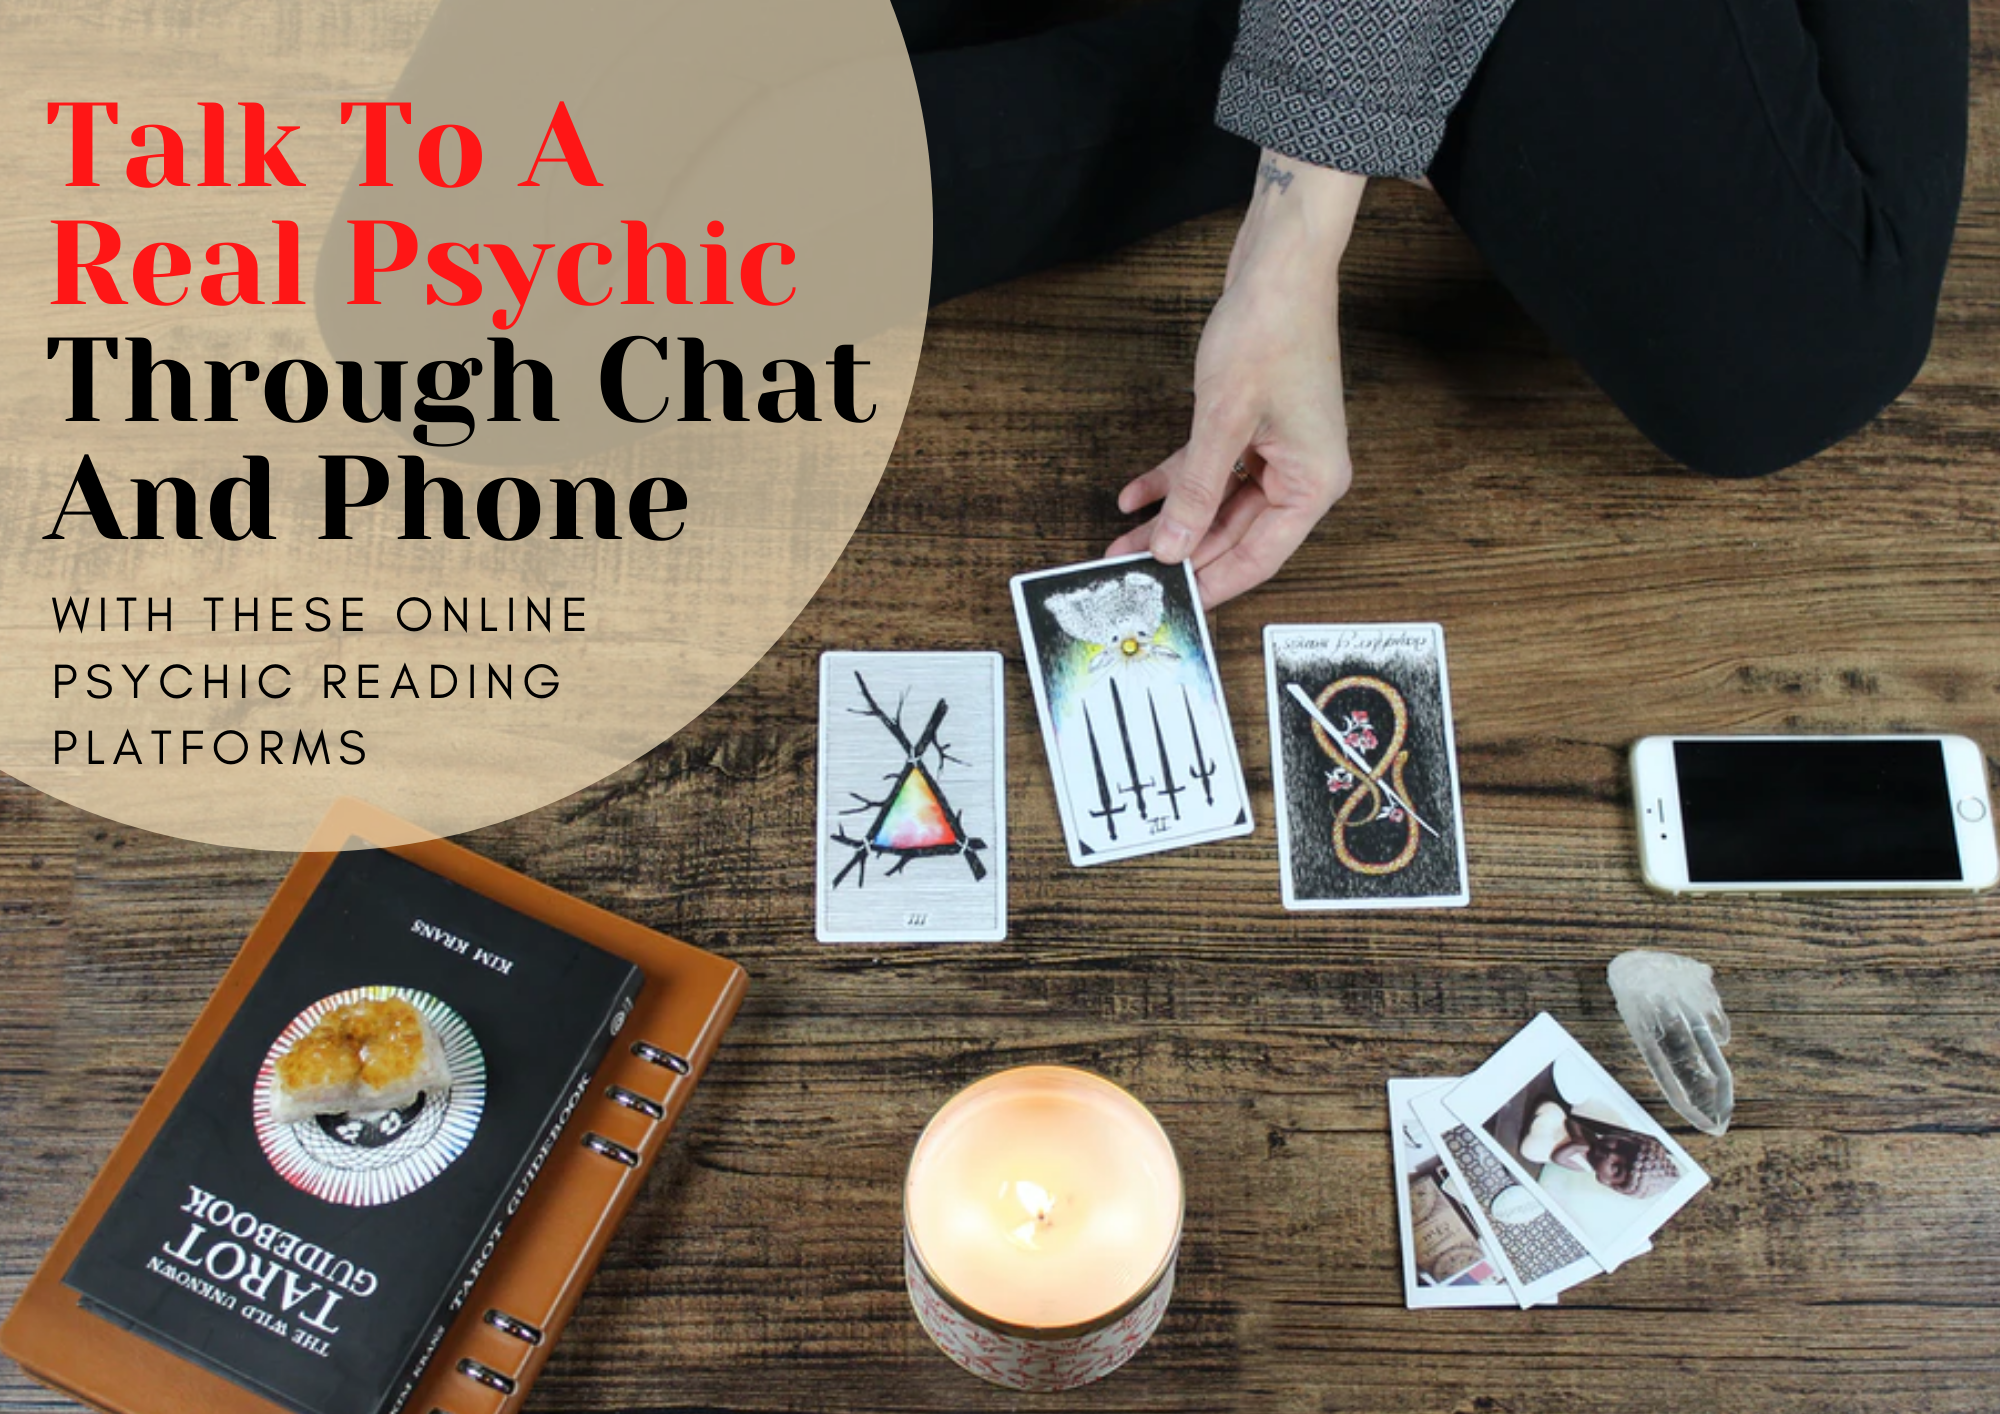 Talk To A Real Psychic Through Chat And Phone With These Online Psychic Reading Platforms